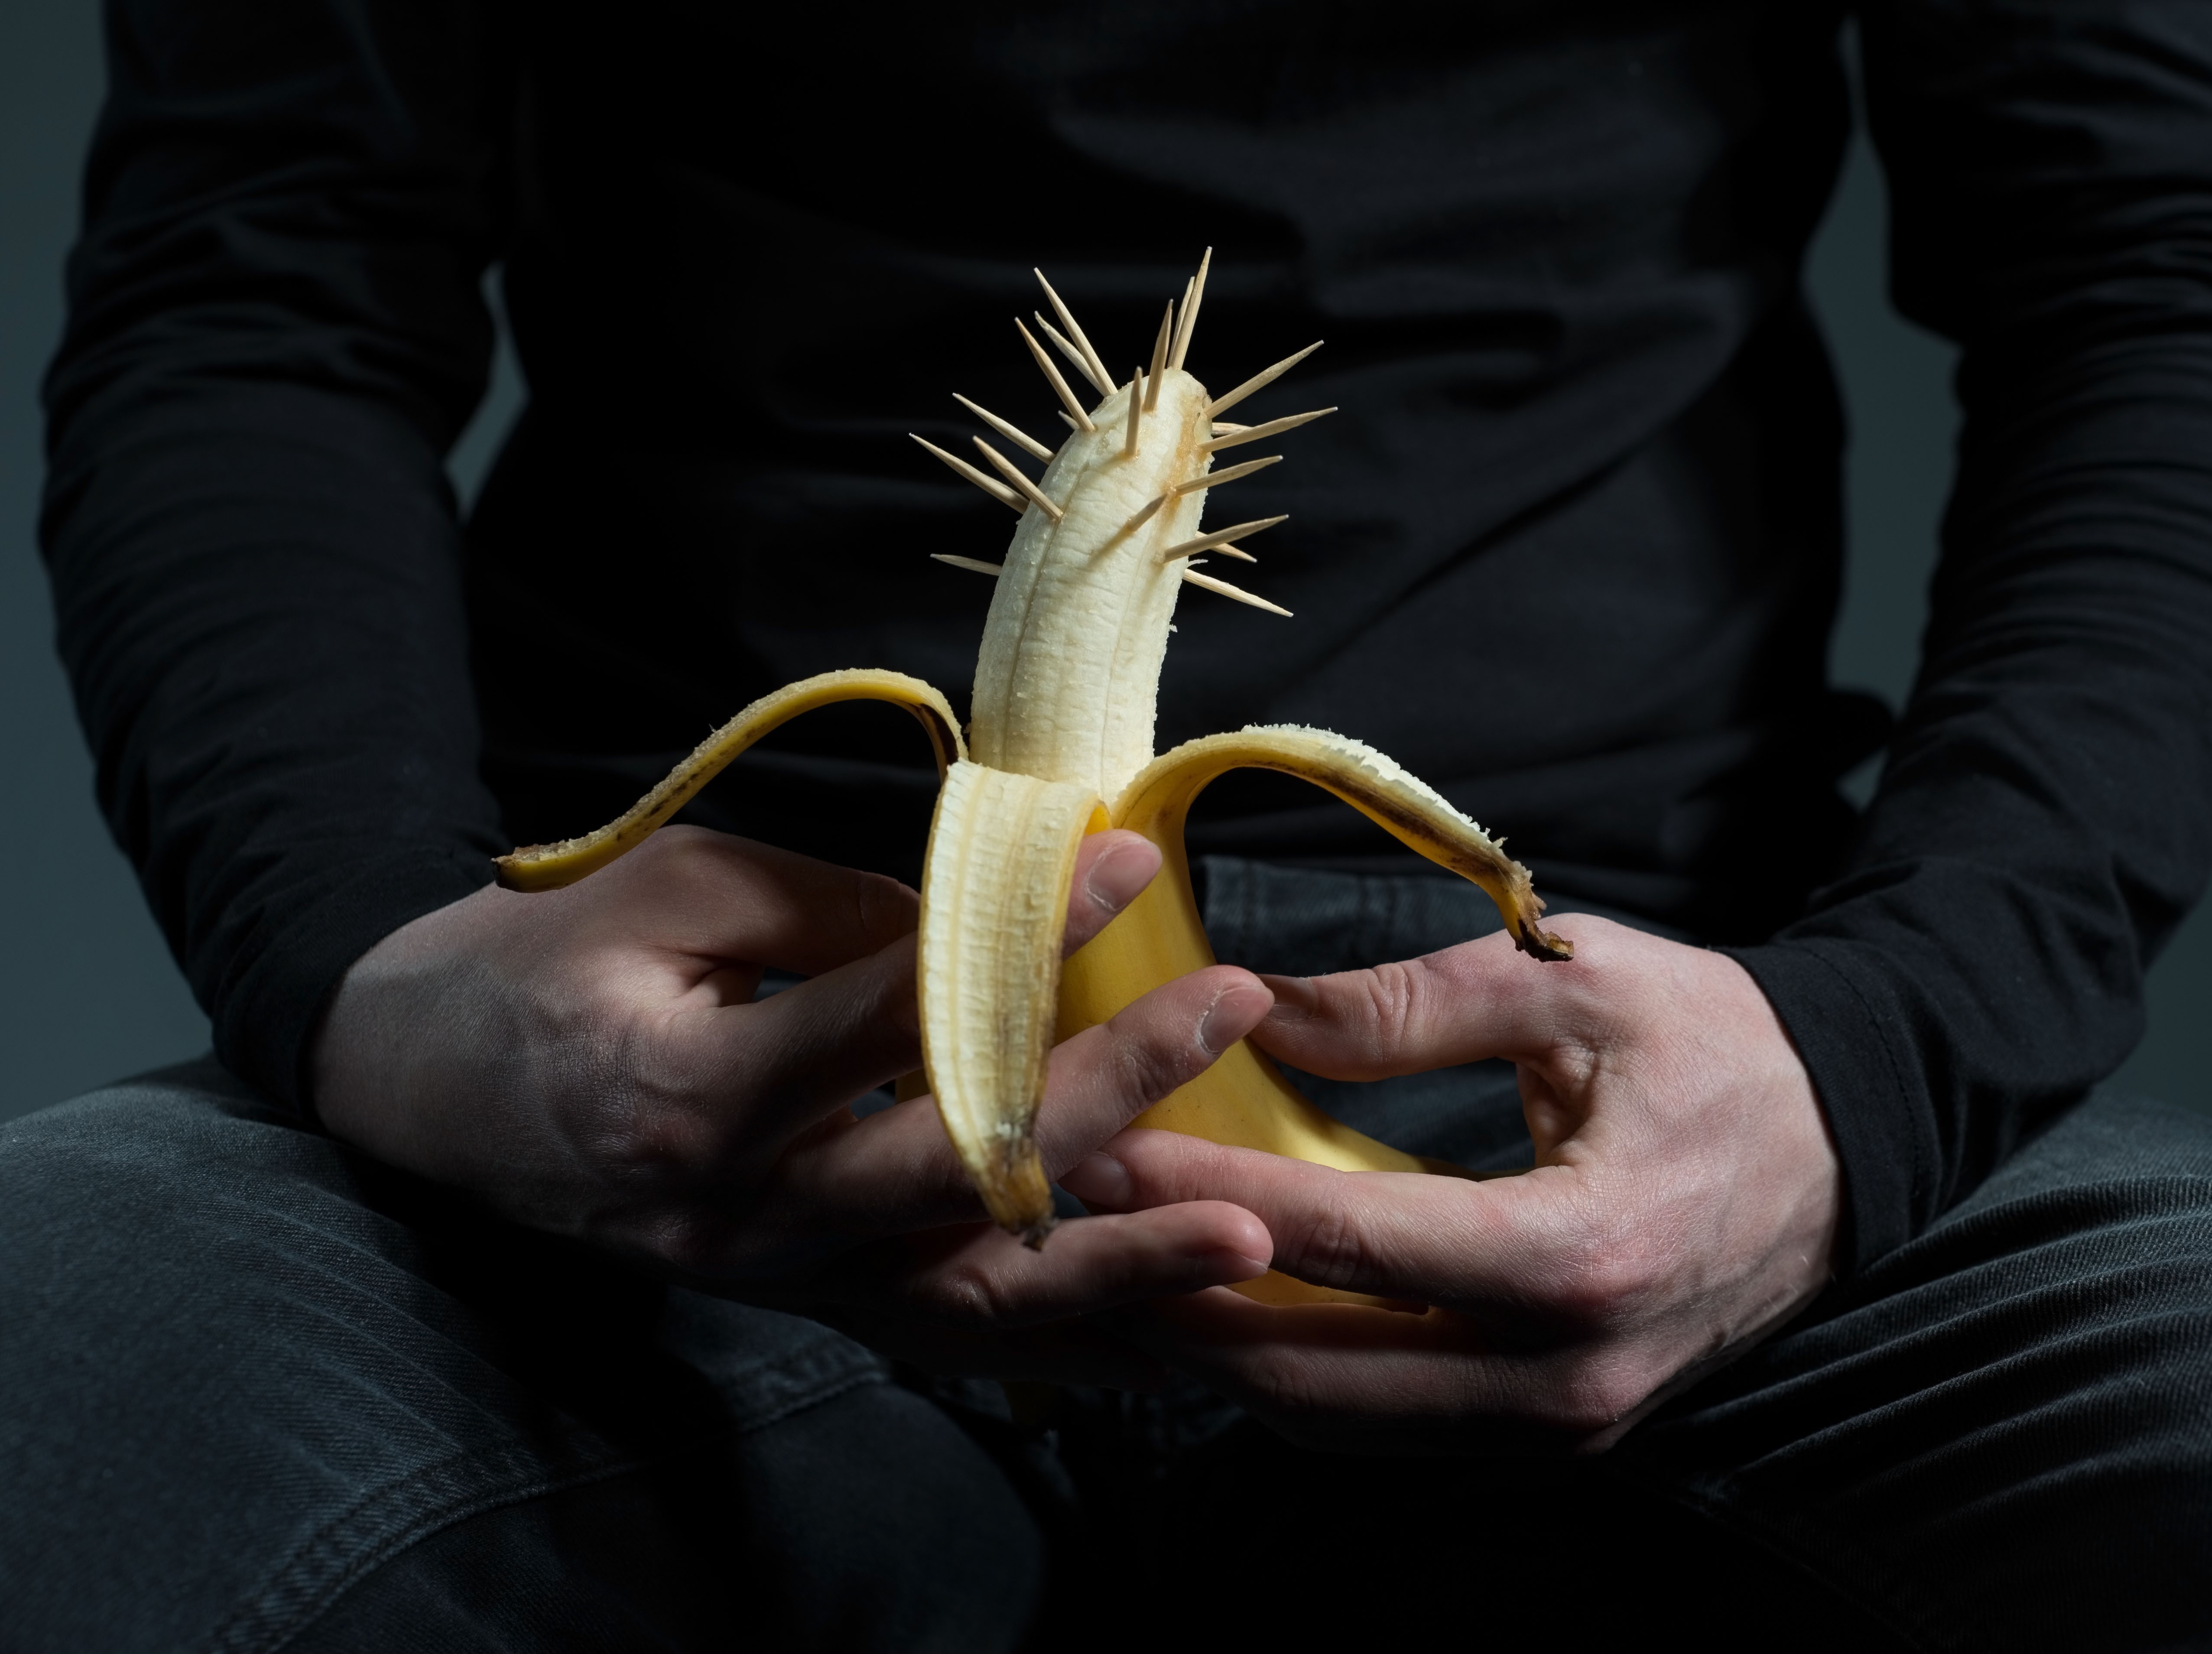 A person holding a banana in their hands.